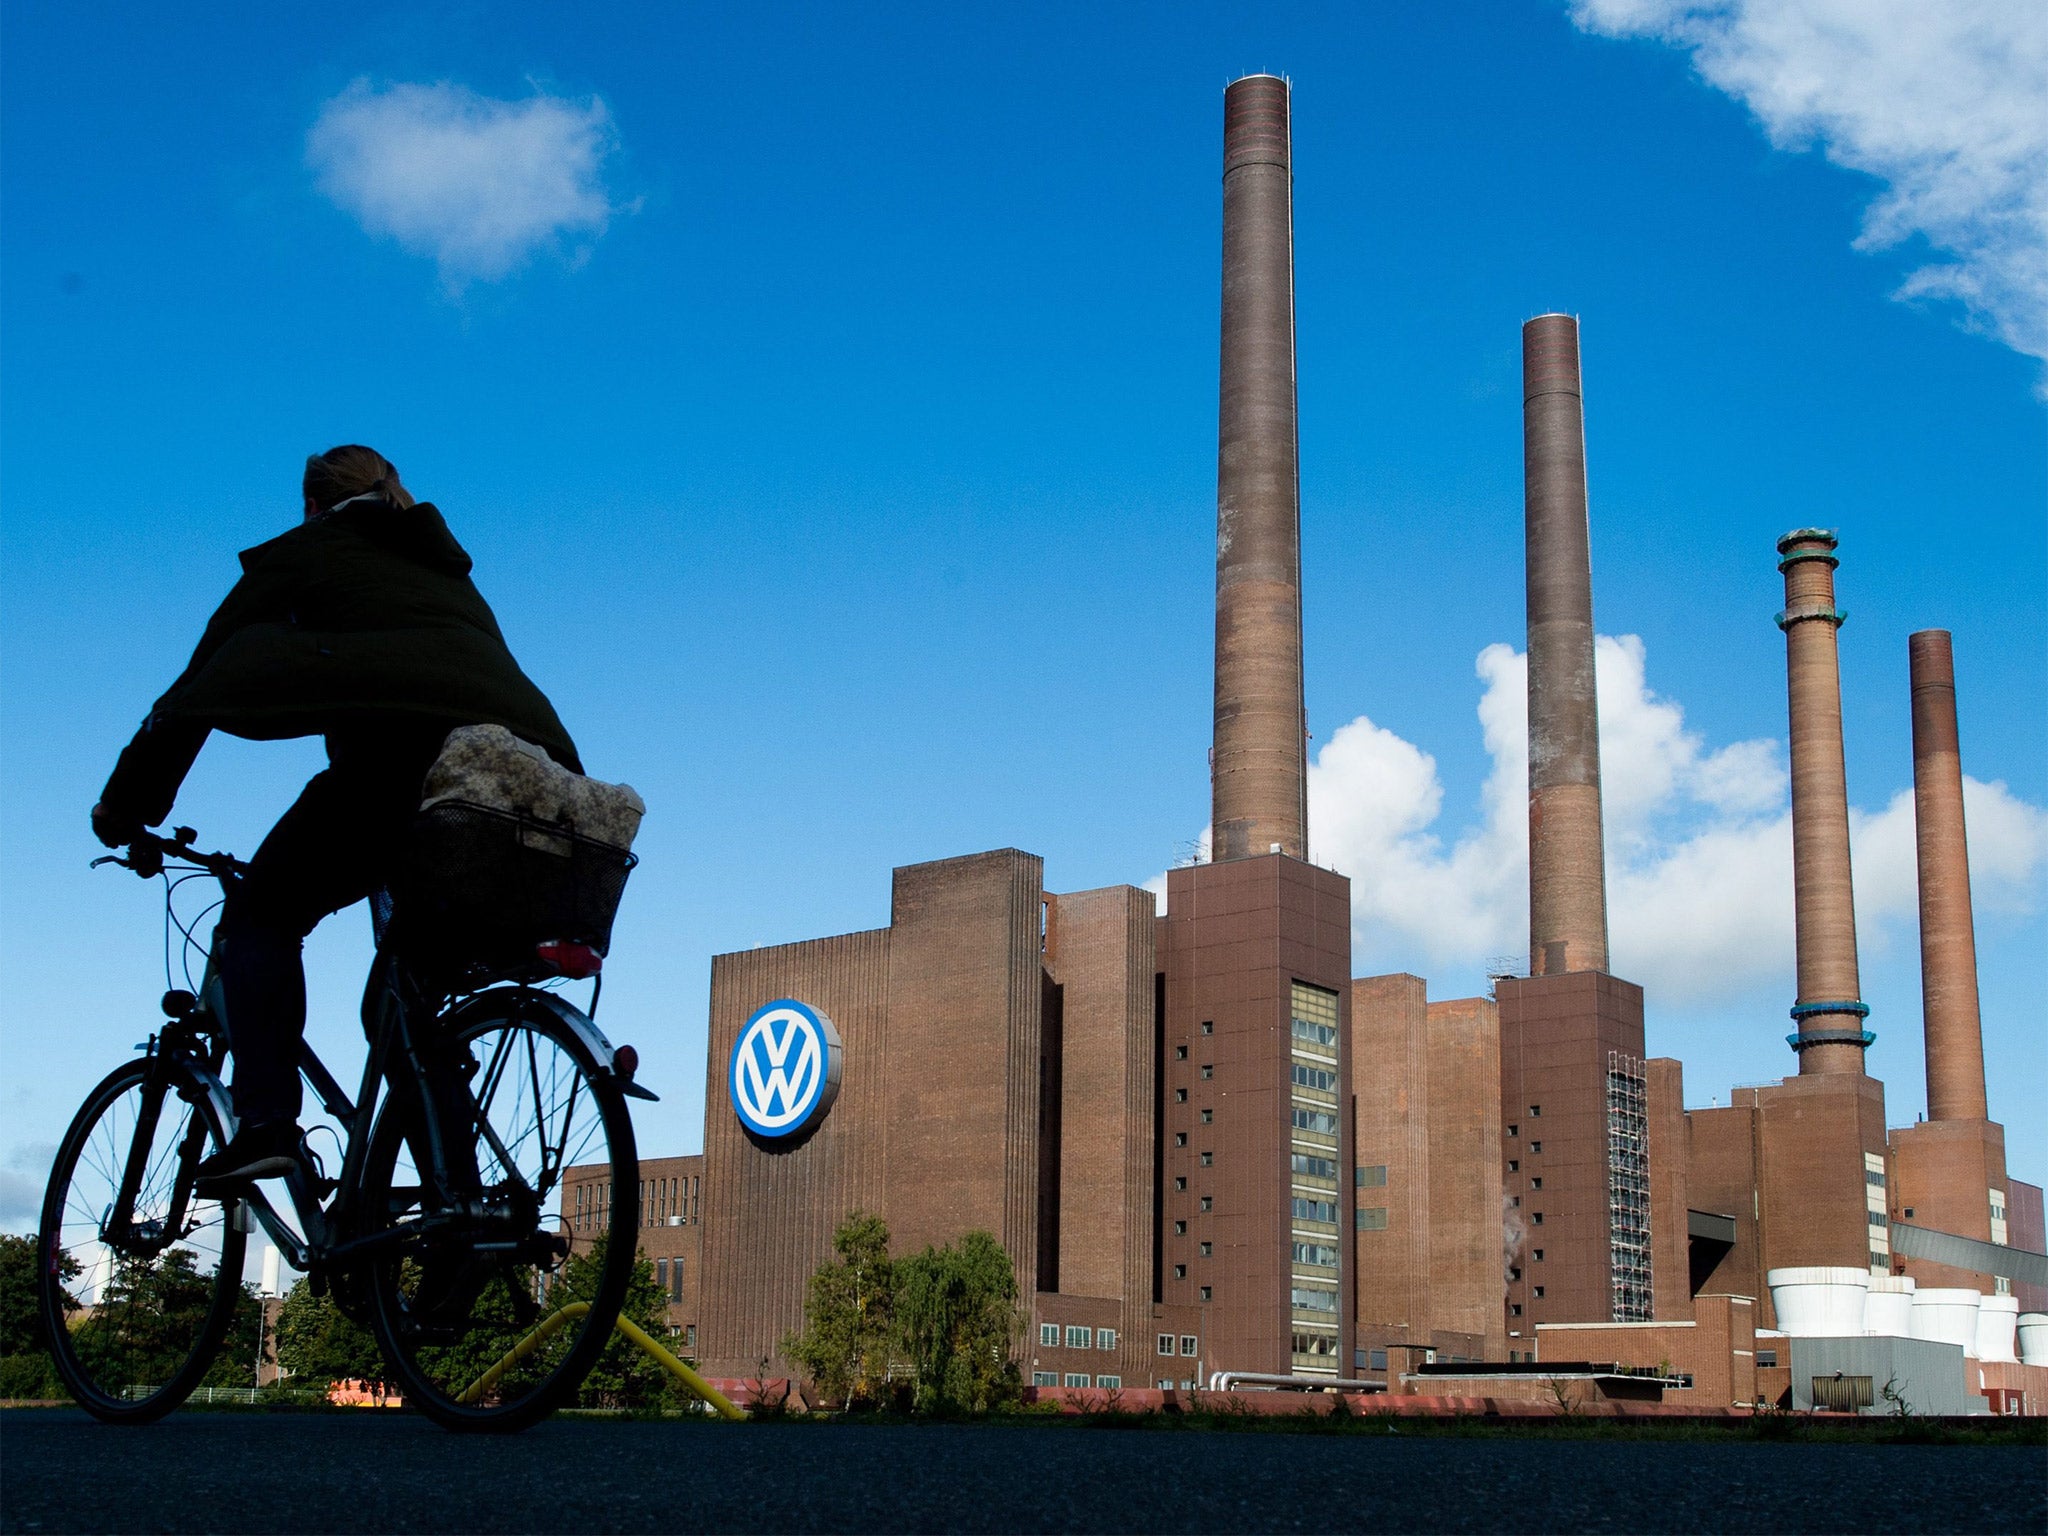 Volkswagen admitted last year that it had installed secret software to cheat US emissions tests.